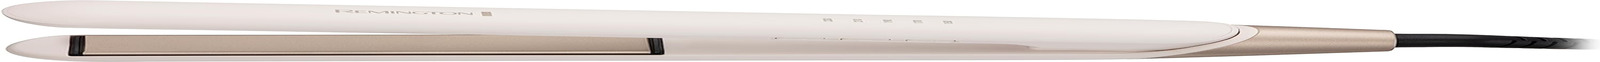 Remington Shea Soft Hair Straightener - 110Mm Floating Coated Plates, Releases M